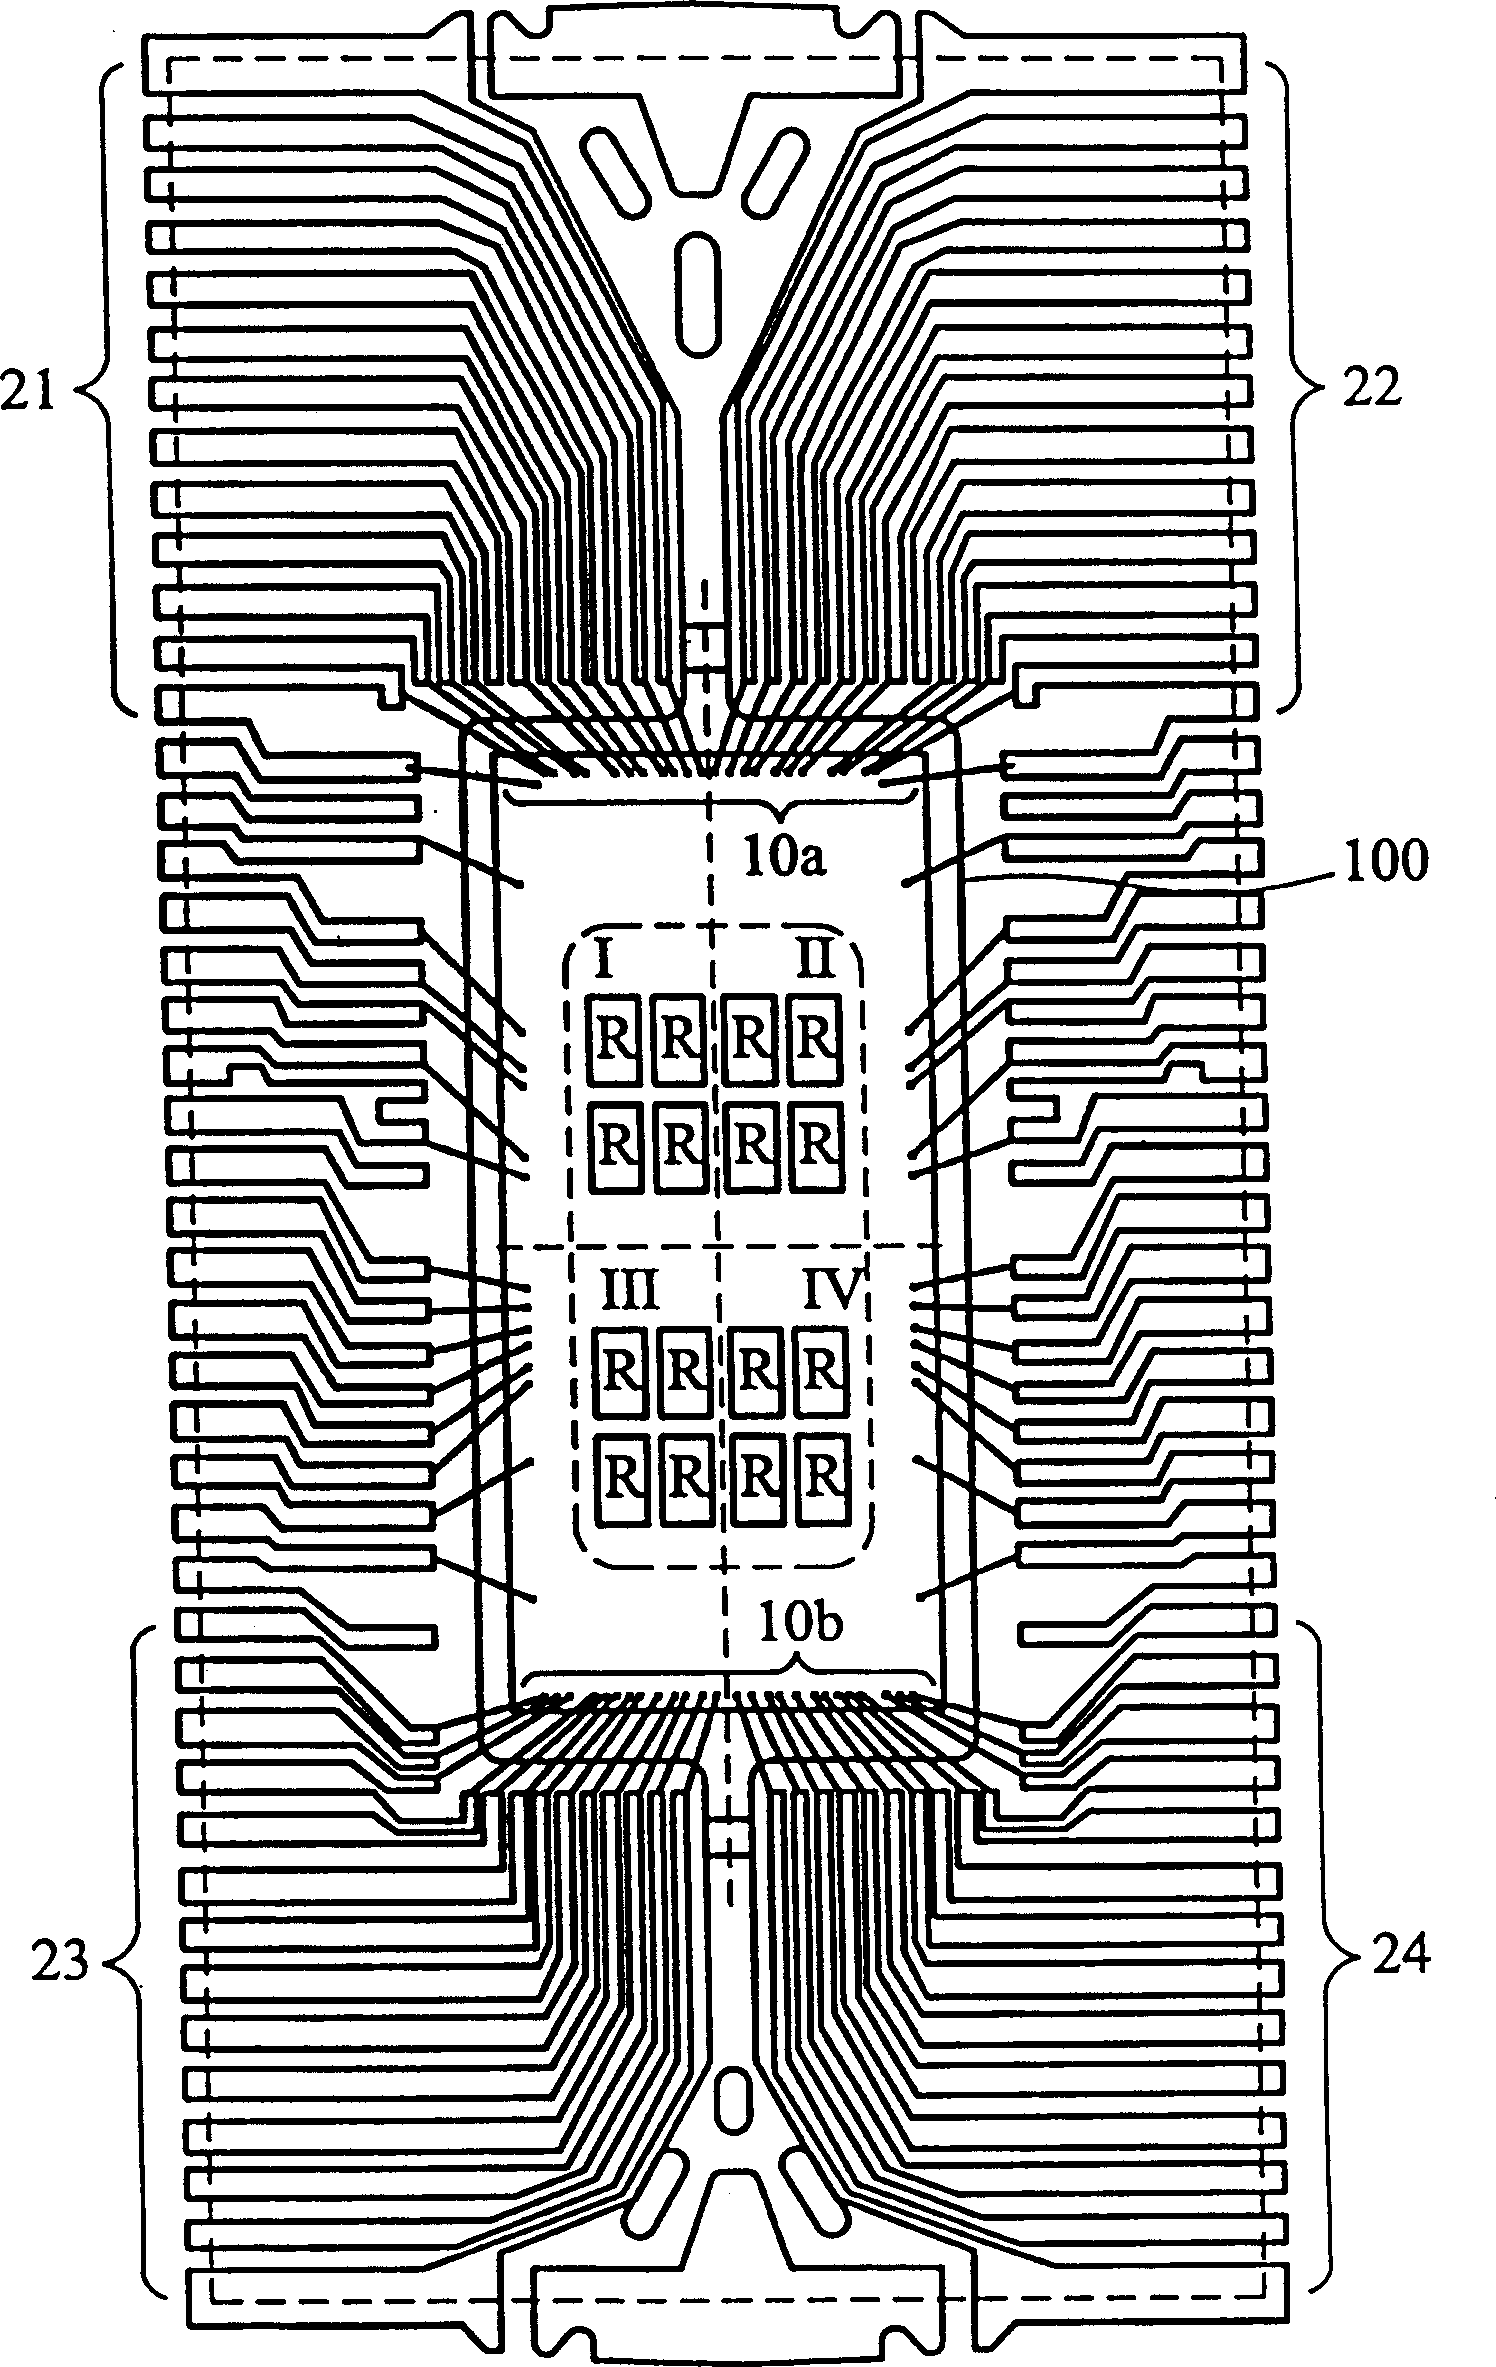 Capsulation body of semiconductor ship